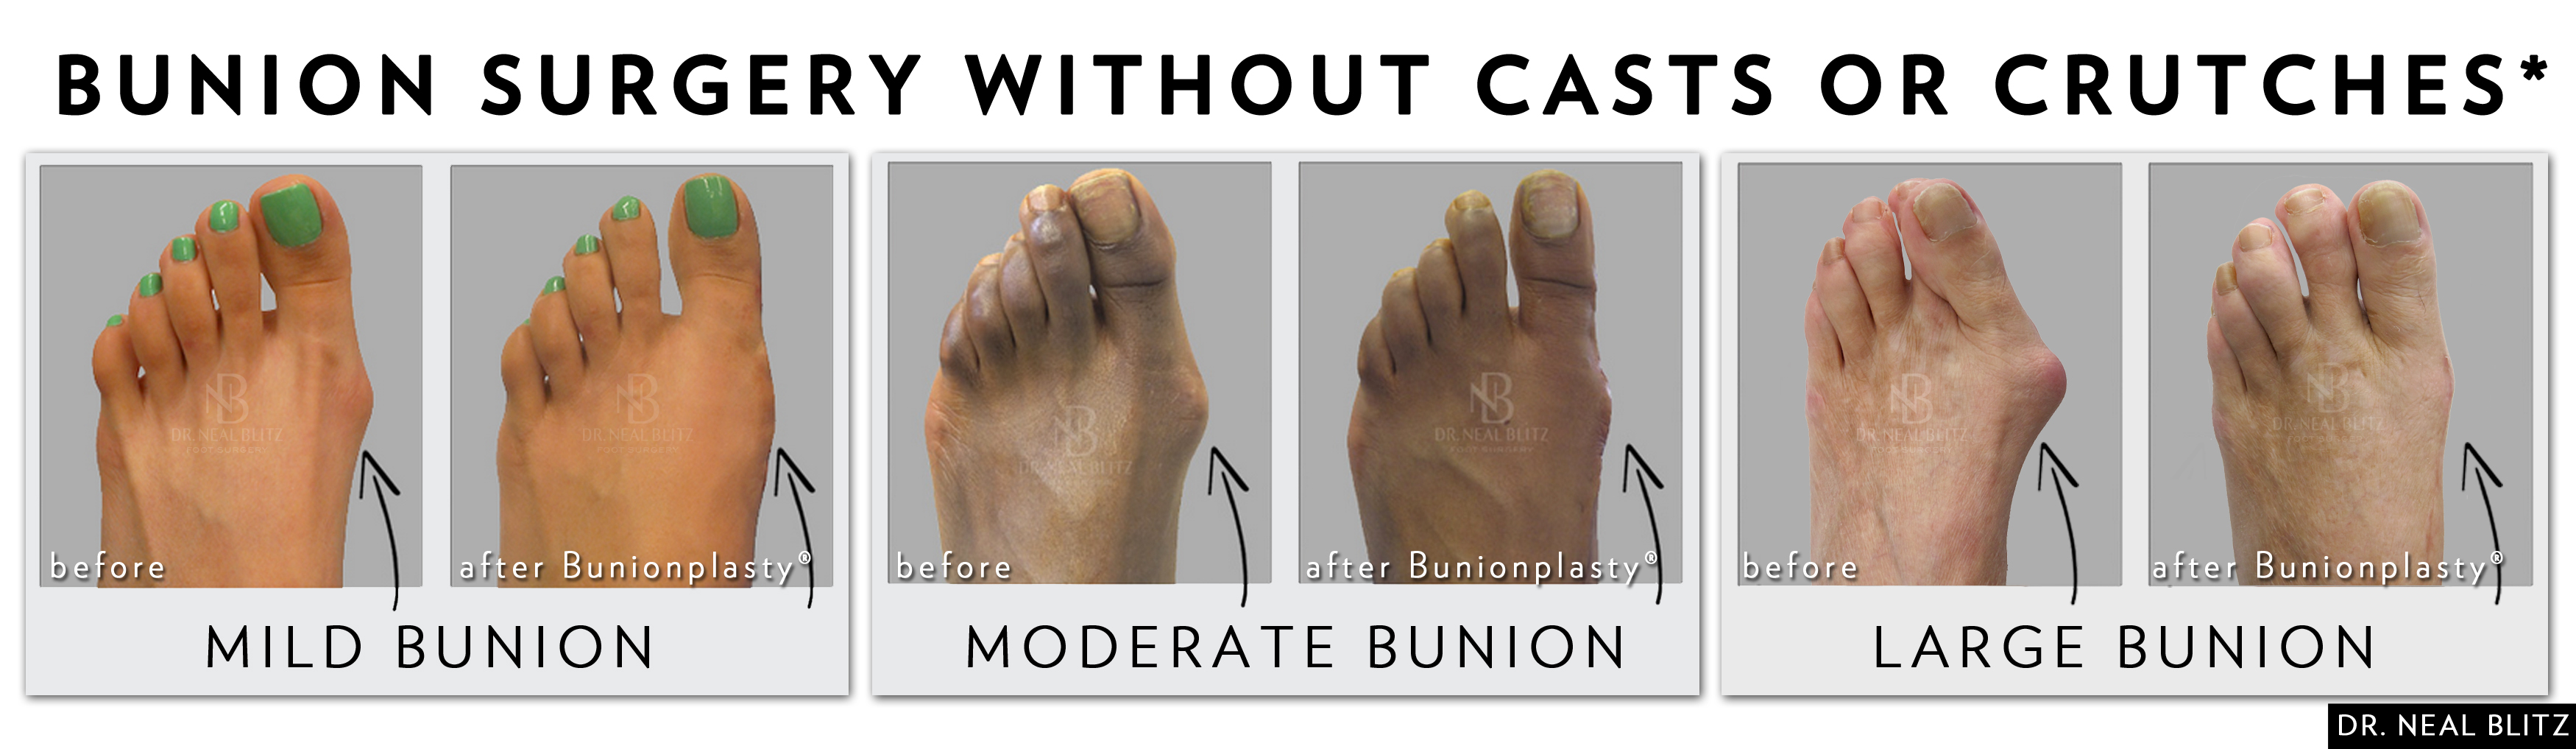 bunion surgery shoes wearing after